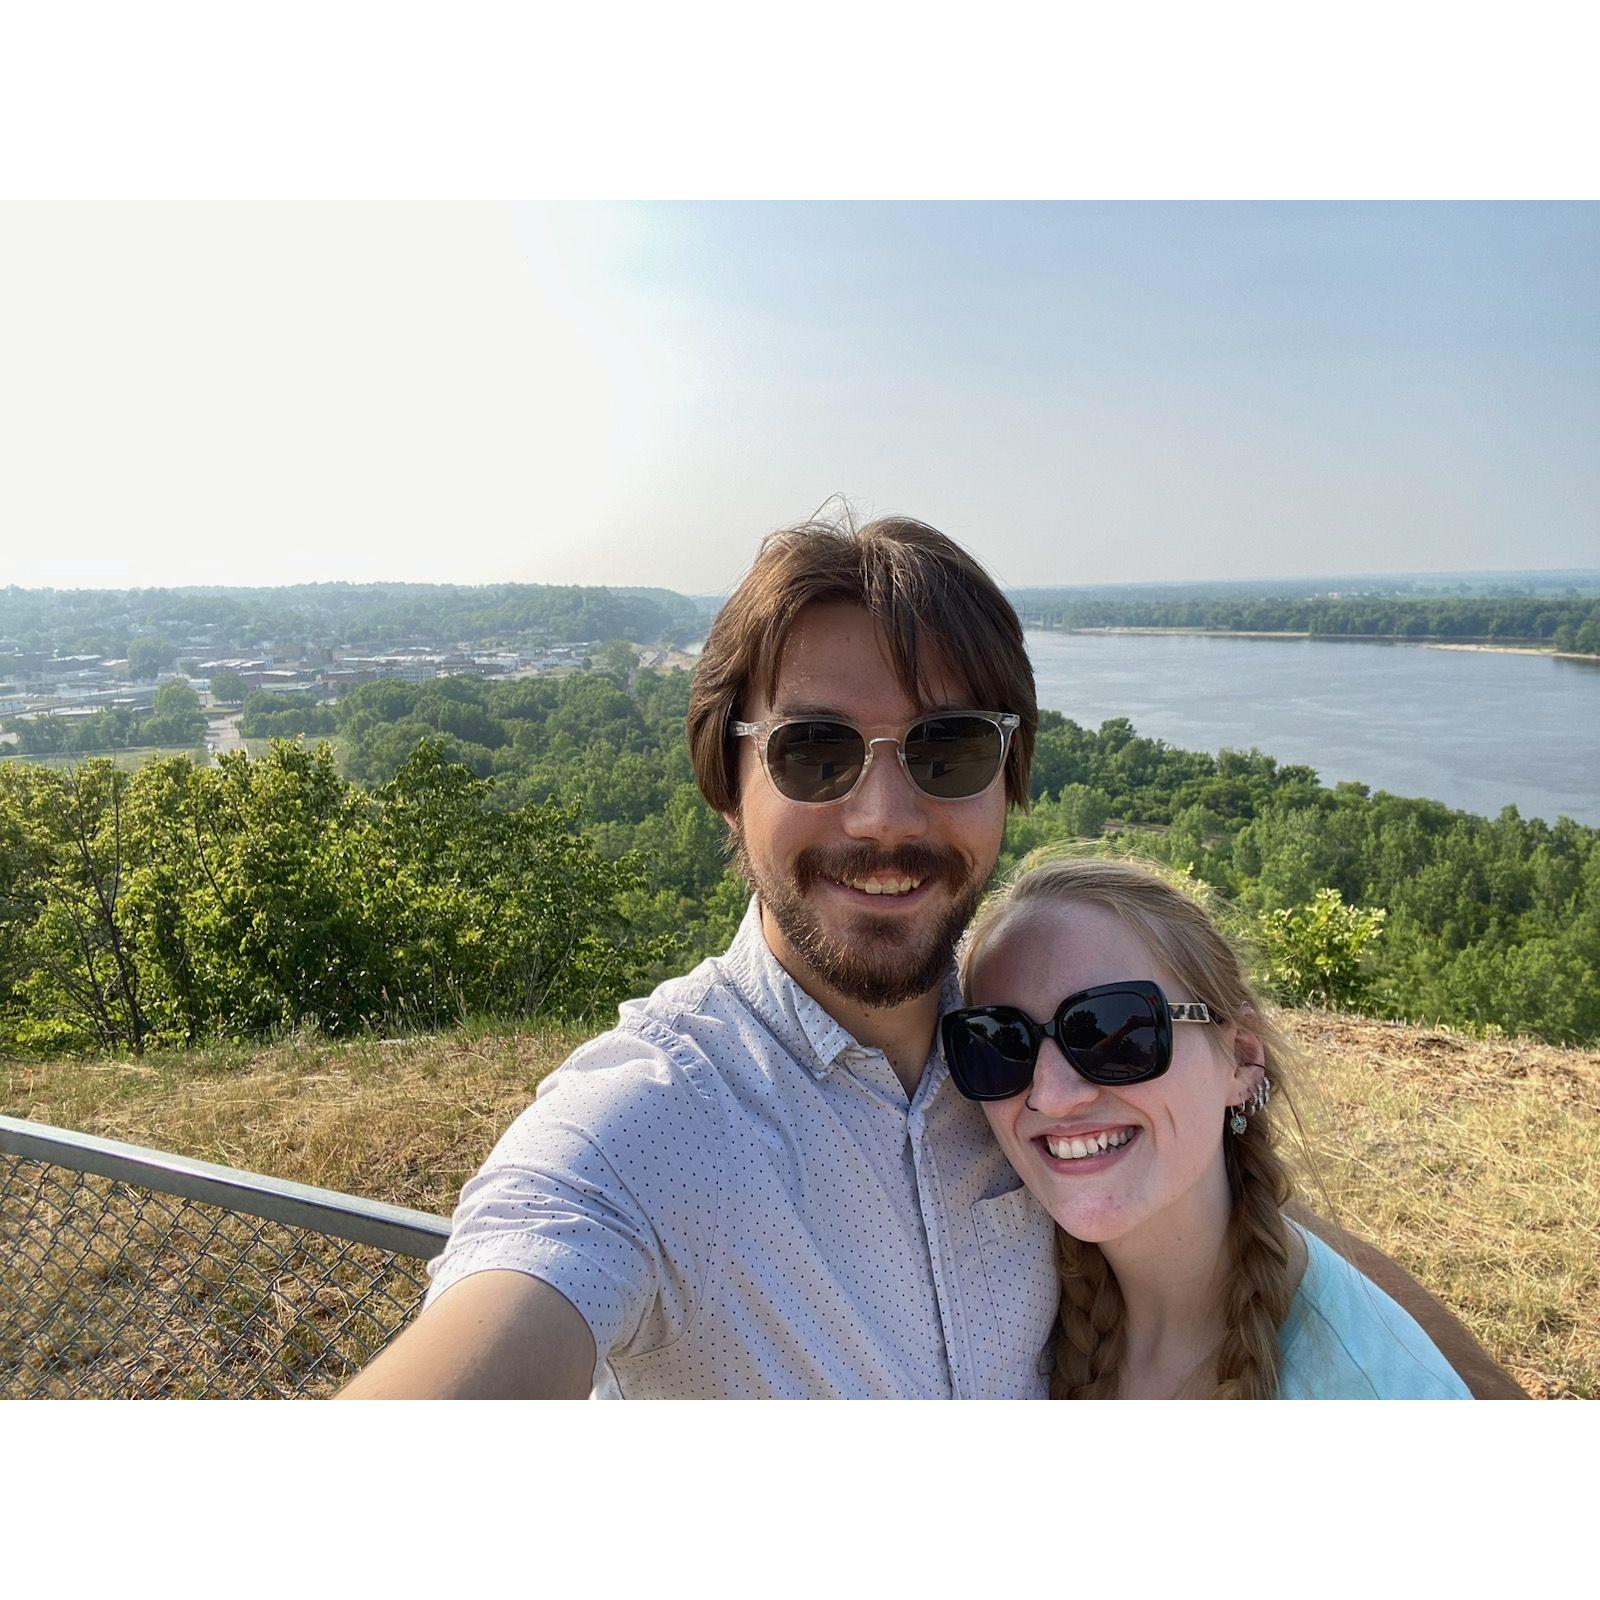 Ethan's favorite photo. We were at Lover's Leap in Hannibal, Missouri!